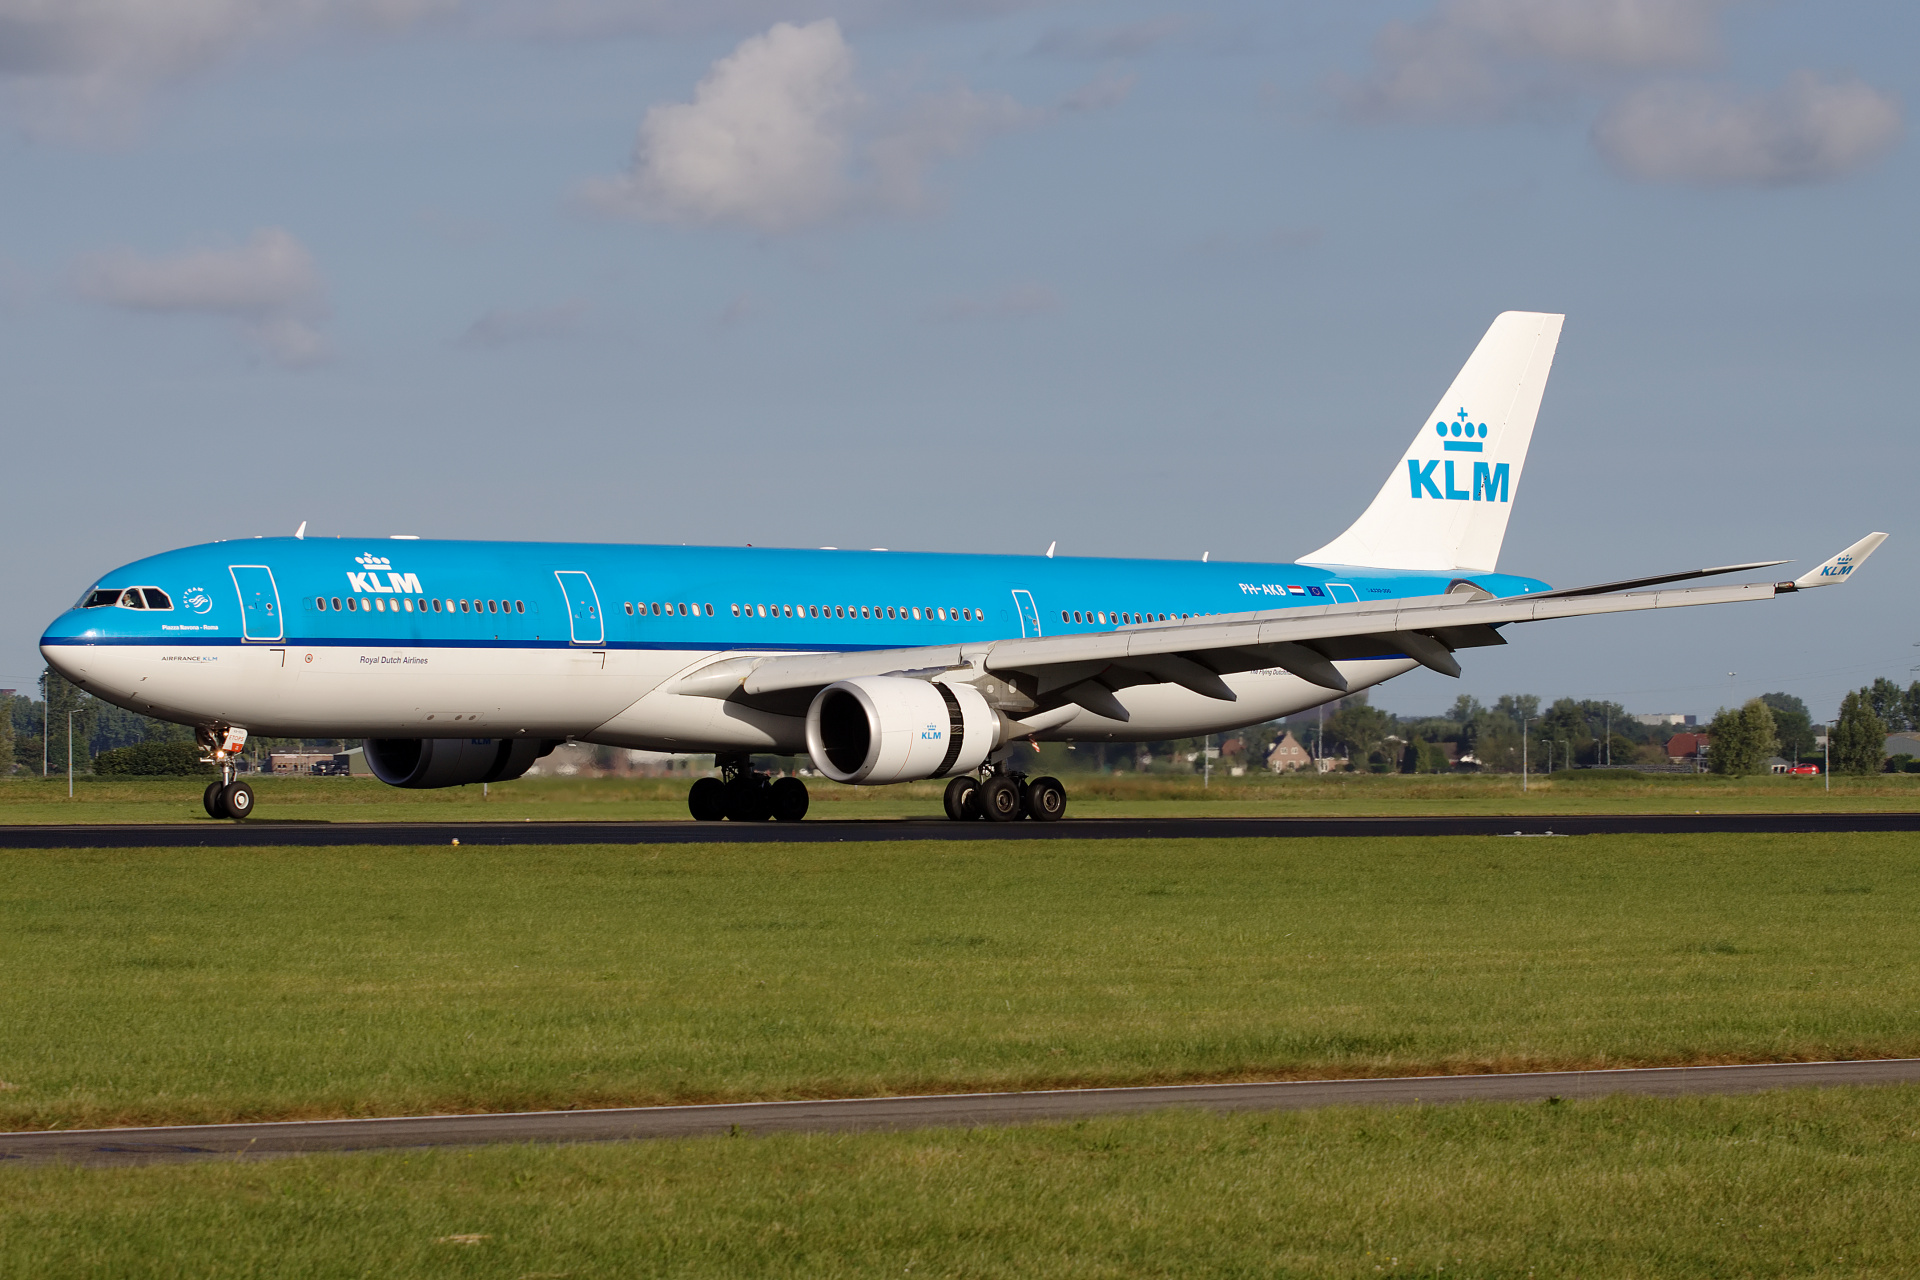 PH-AKB (Aircraft » Schiphol Spotting » Airbus A330-300 » KLM Royal Dutch Airlines)